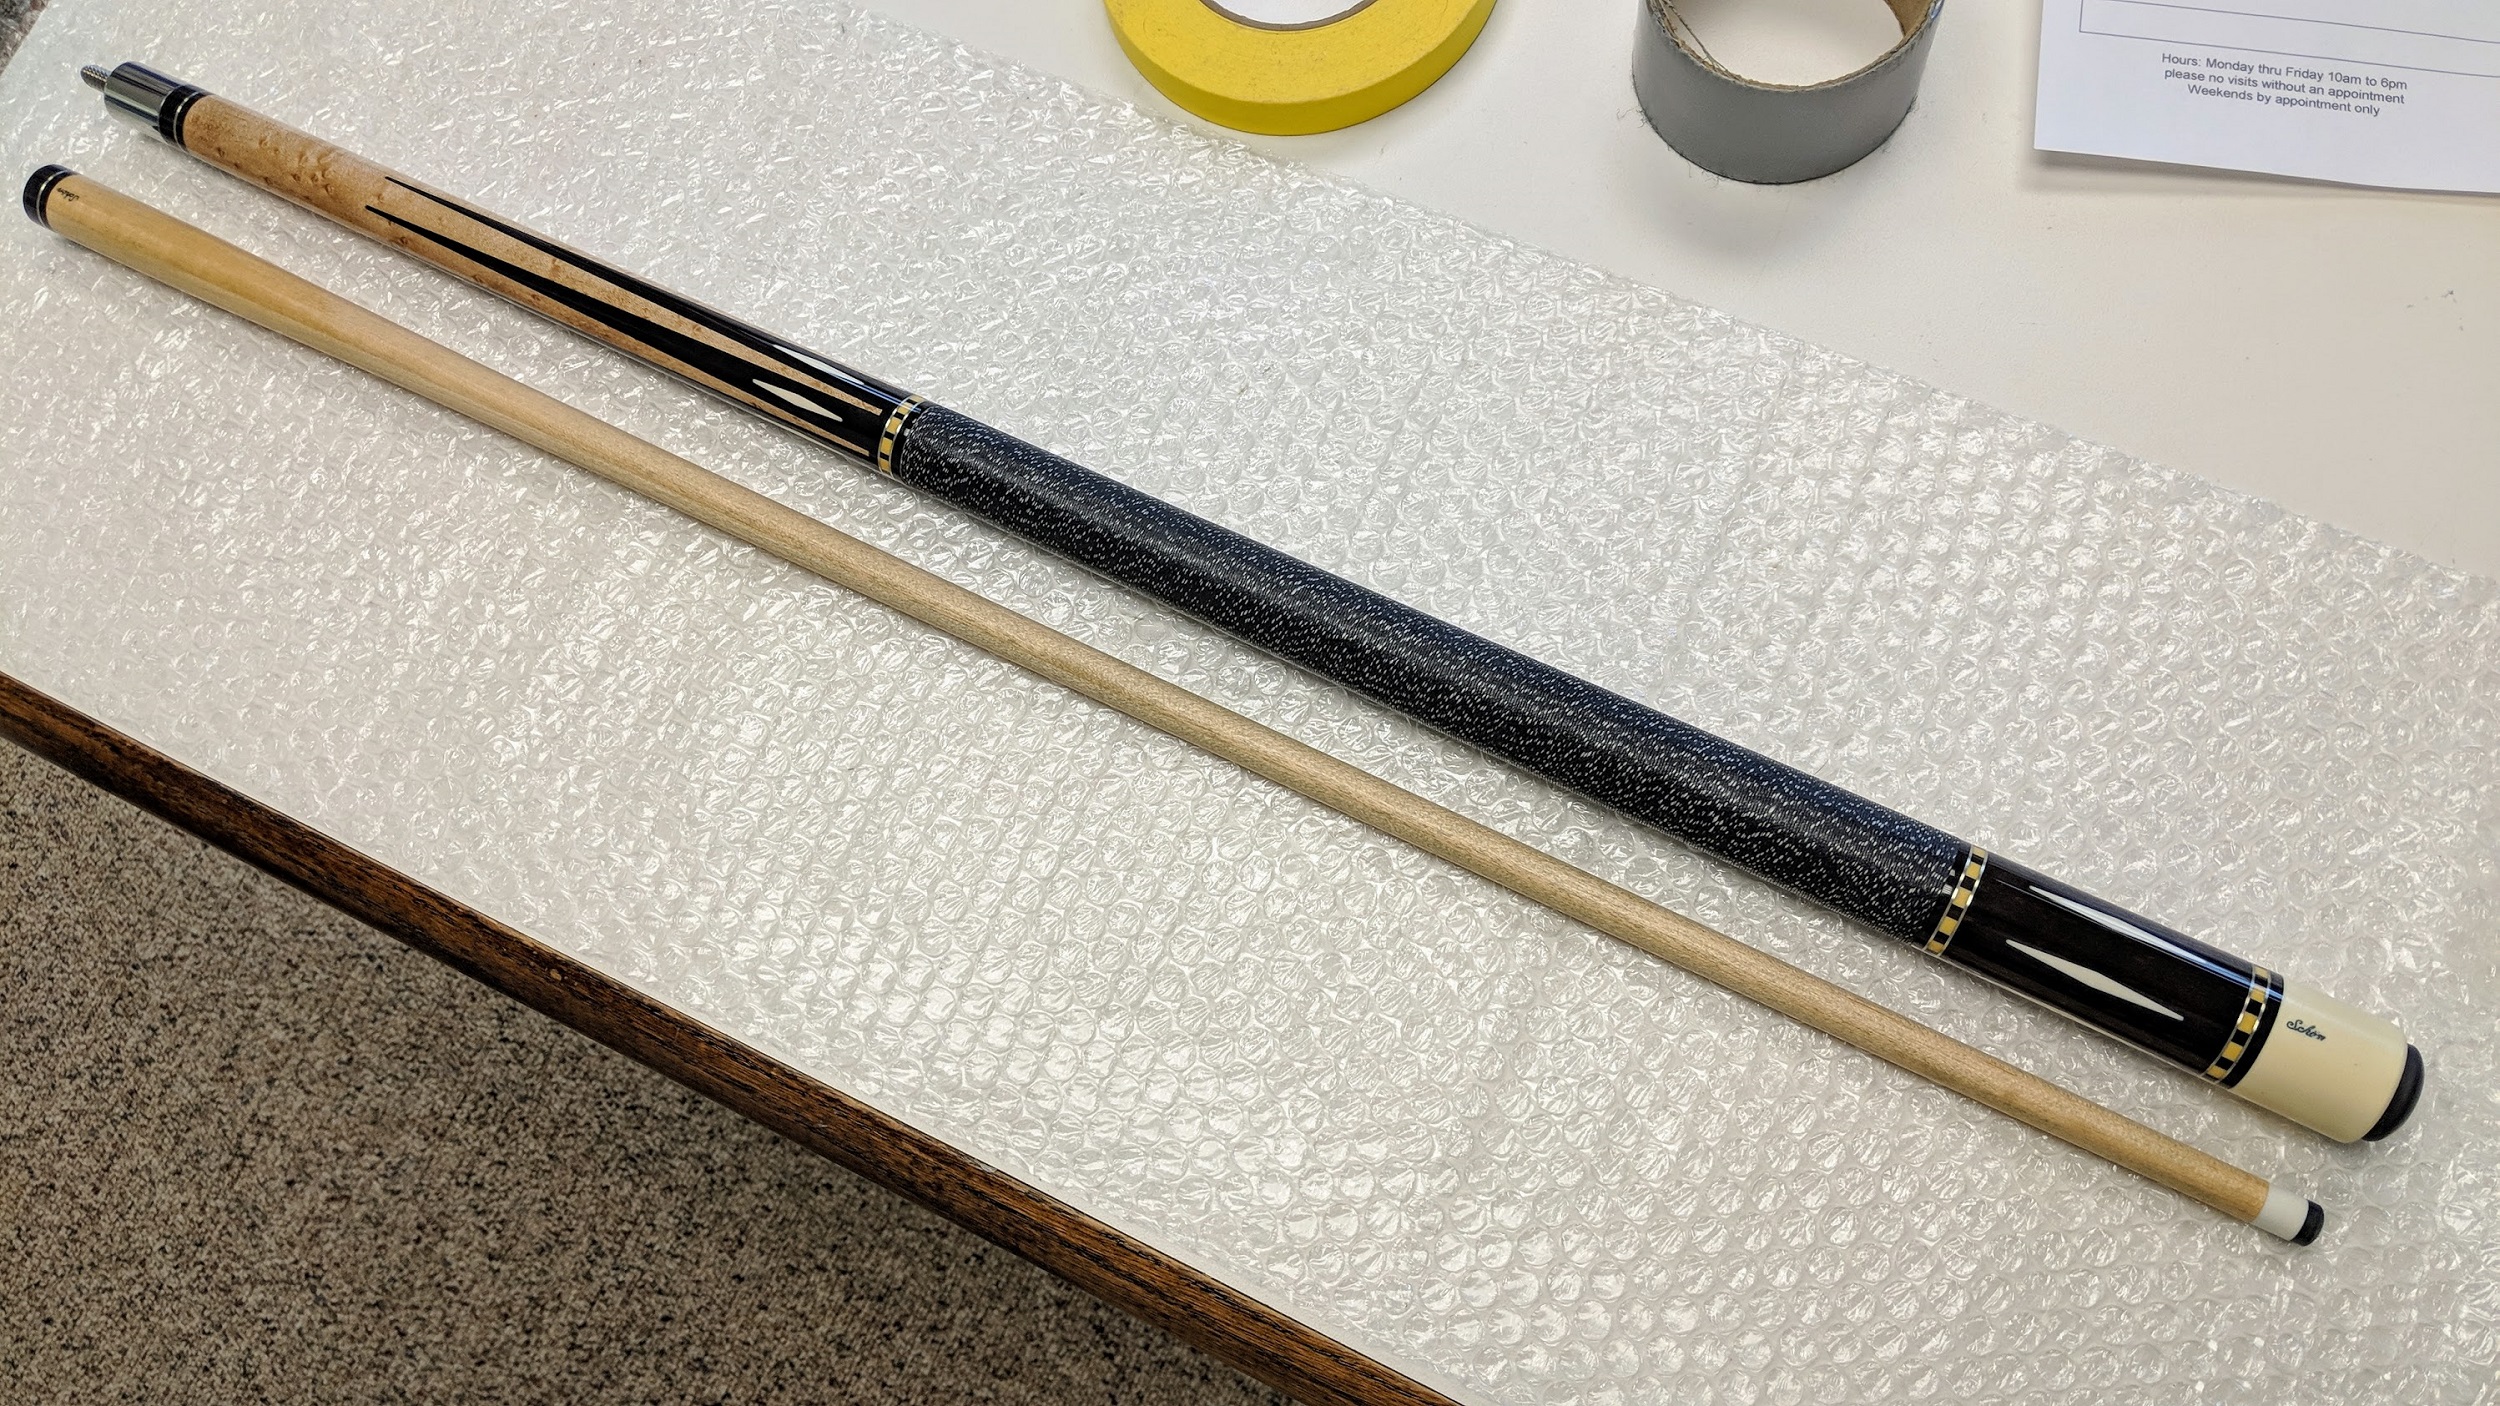 Some of the cue repair that went out the door today